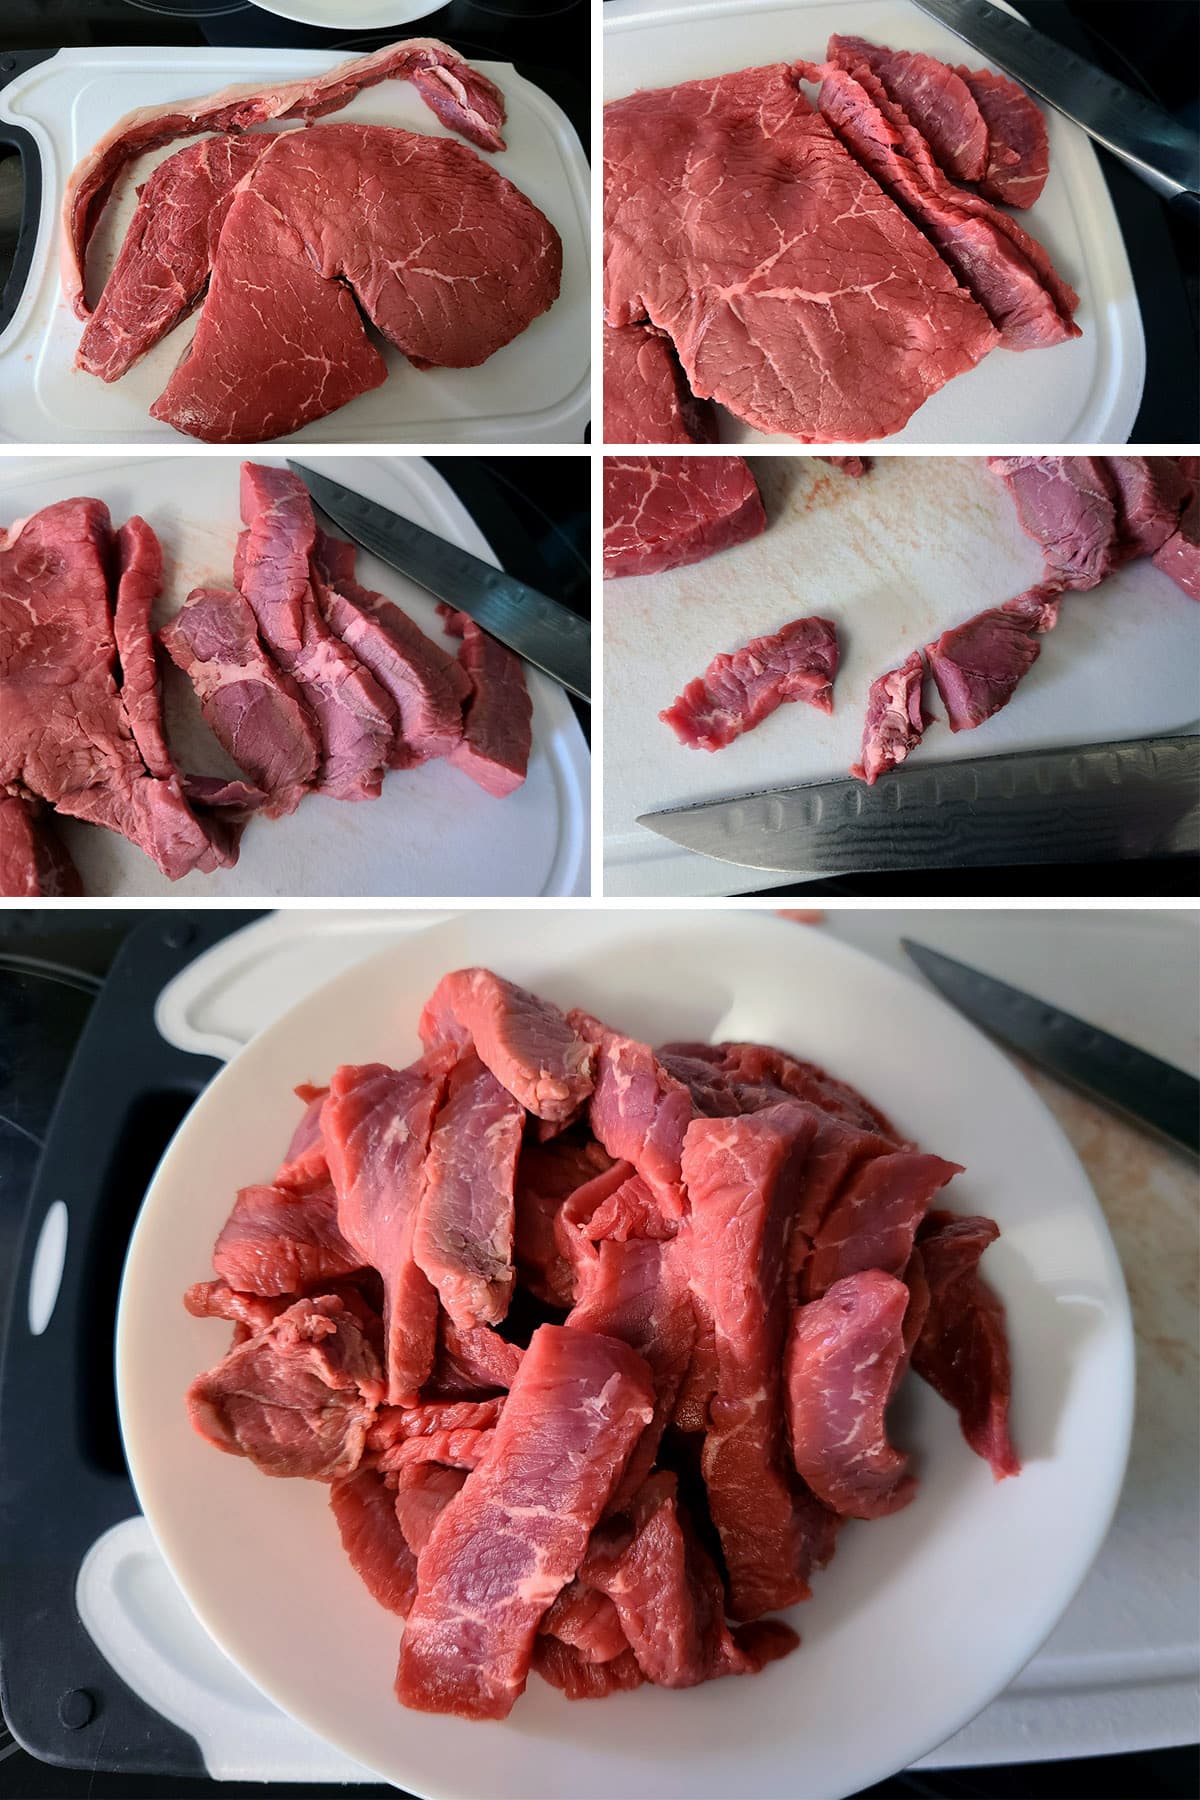 A 5 part image showing the beef sirloin being thinly sliced.